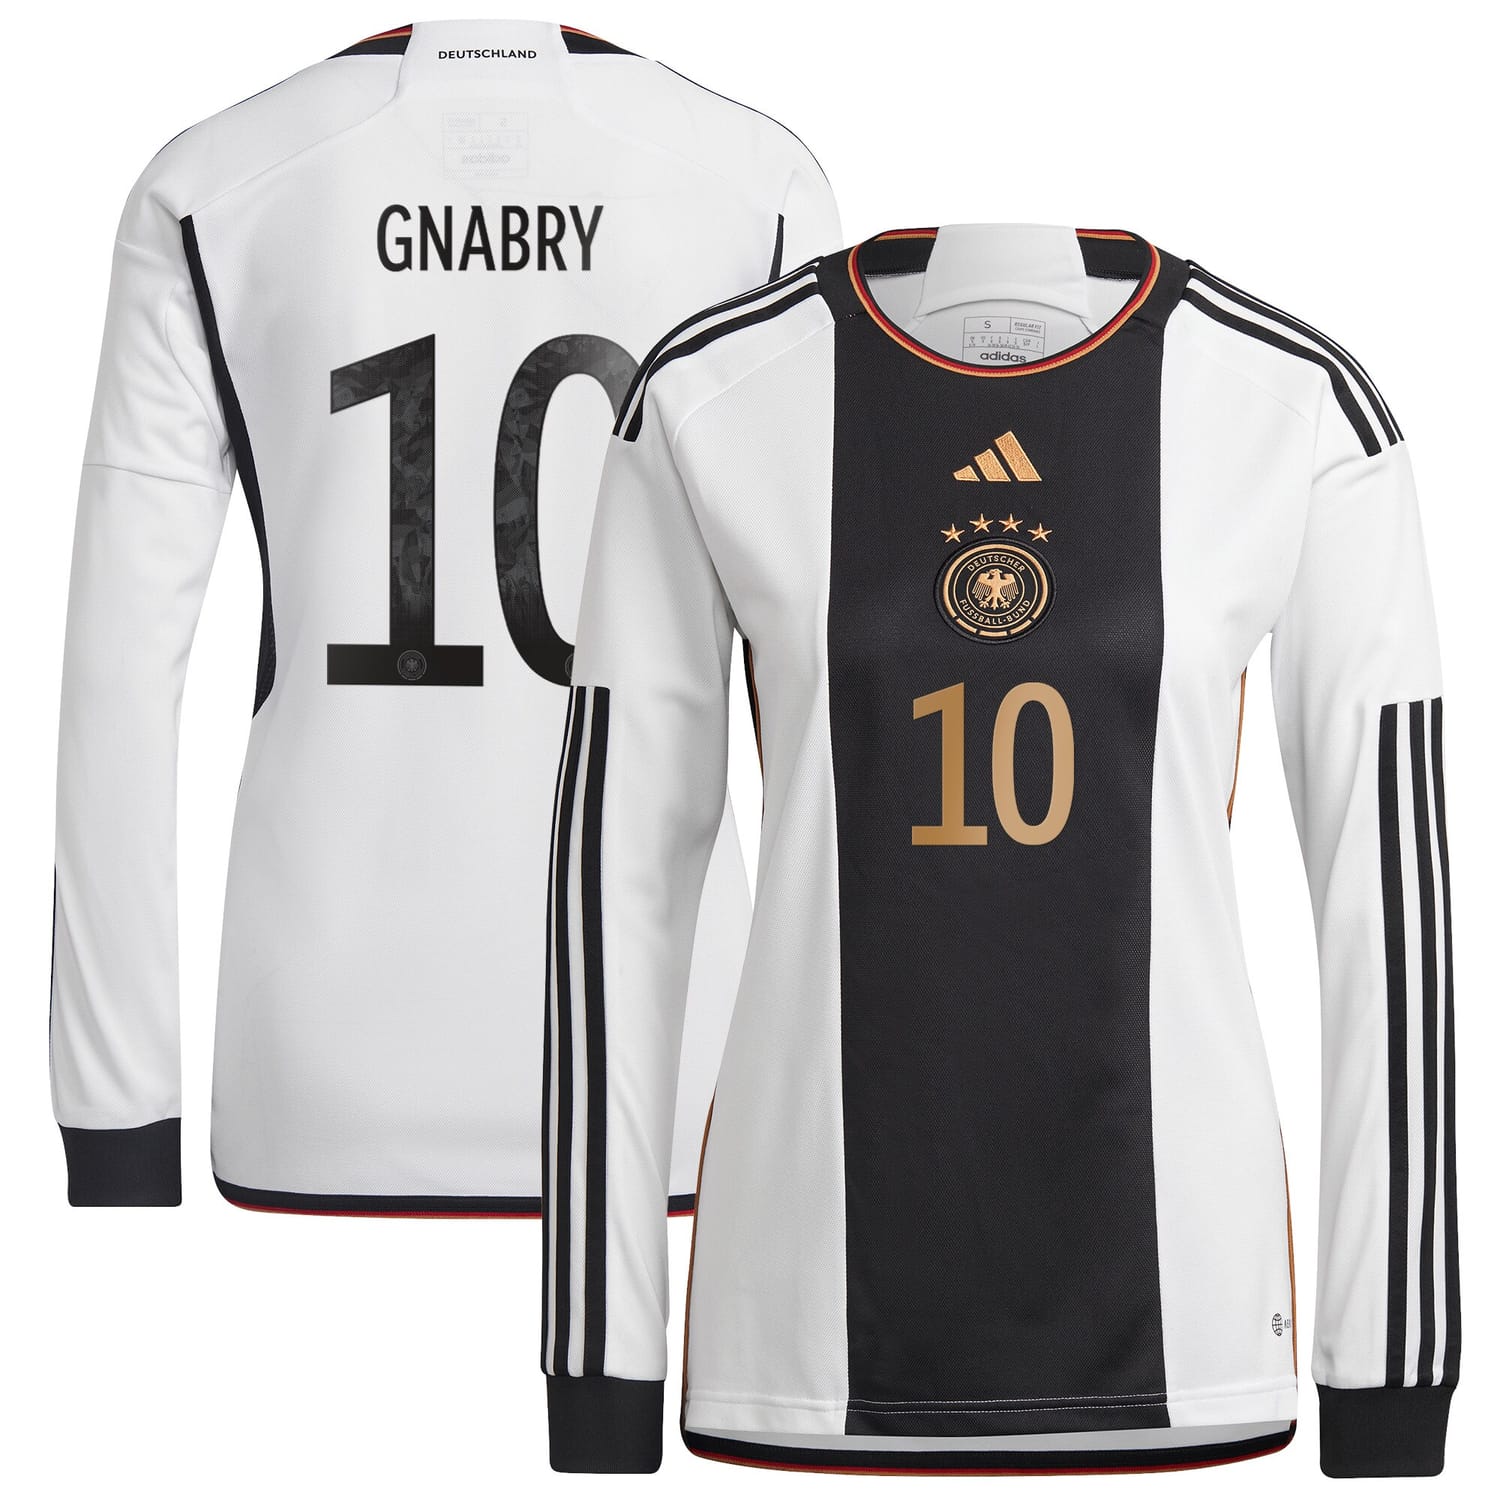 Germany National Team Home Jersey Shirt Long Sleeve player Serge Gnabry 10 printing for Women